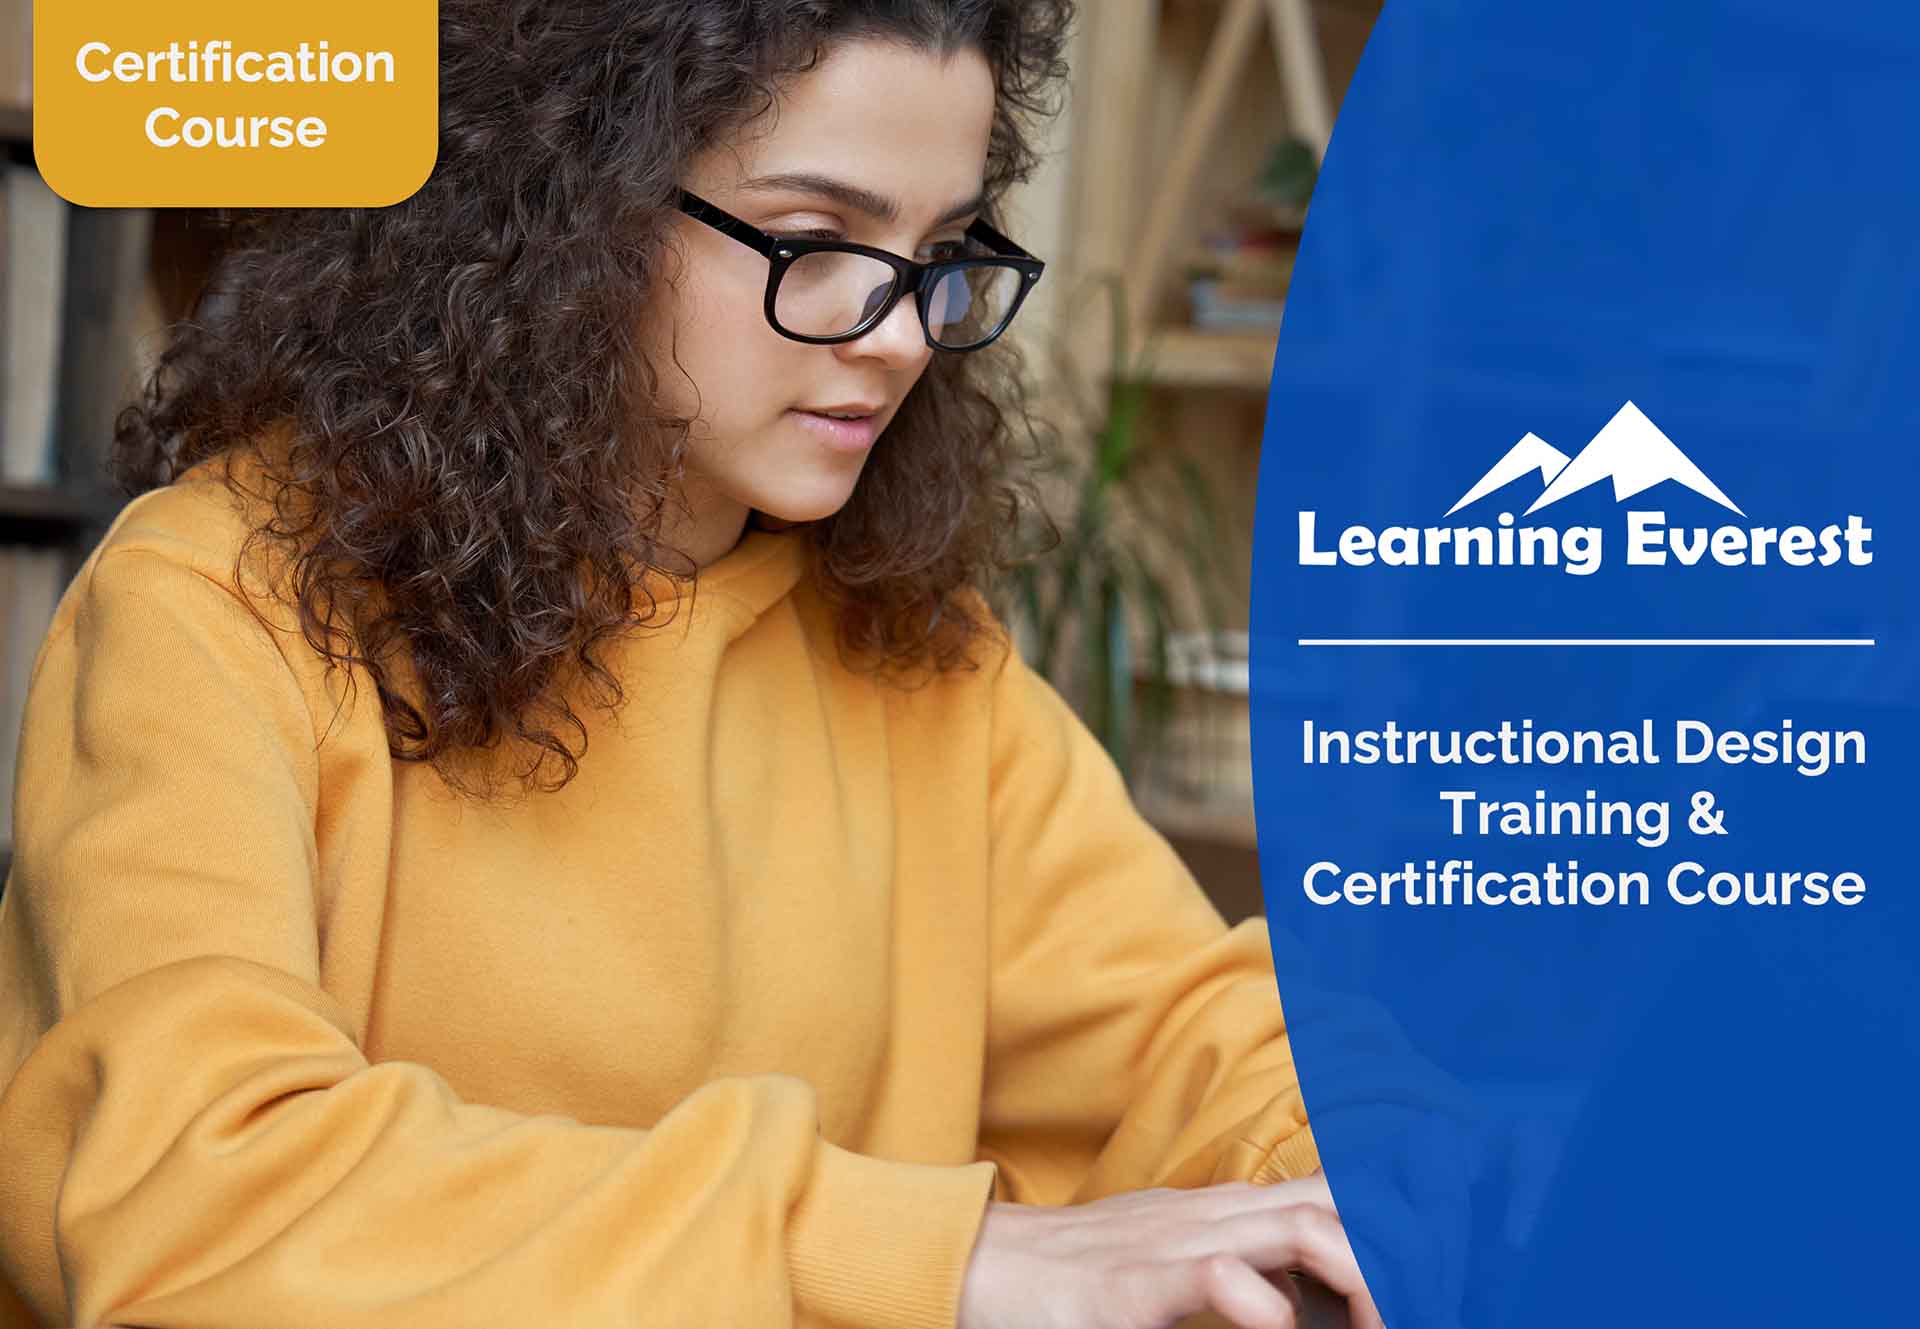 Instructional Design Training and Certification Course